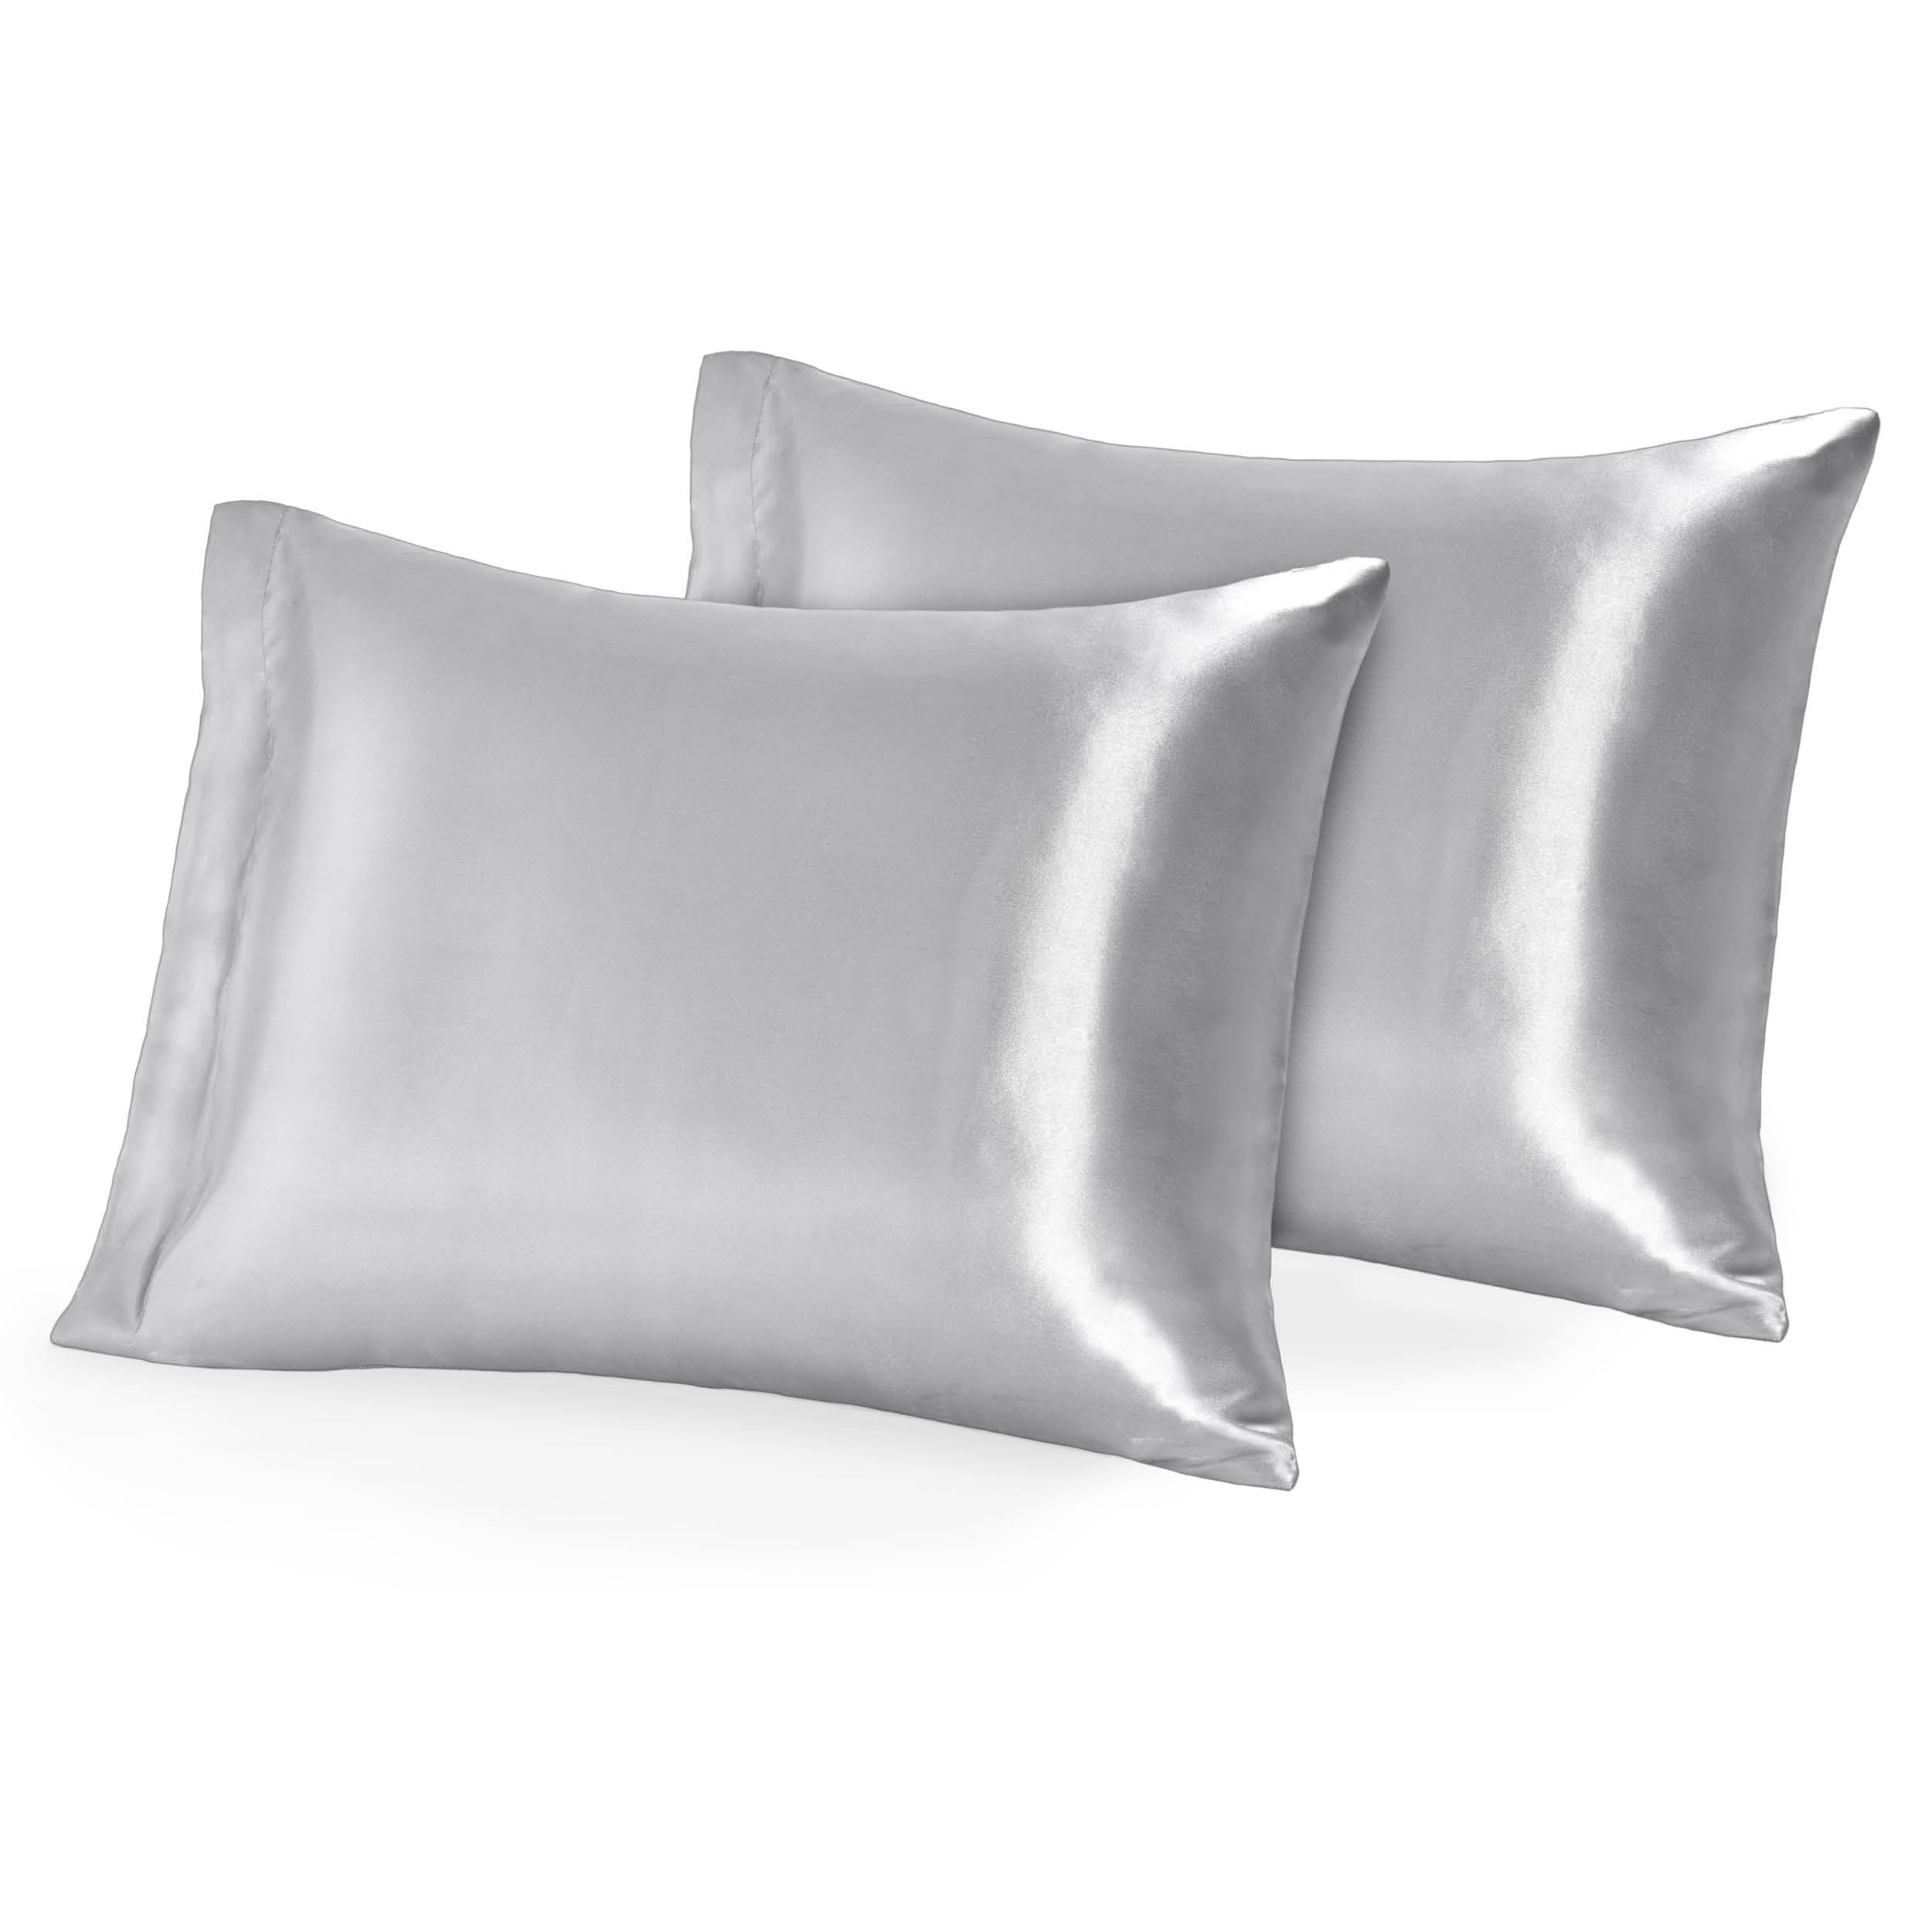 Two pillows topped with silk pillowcases